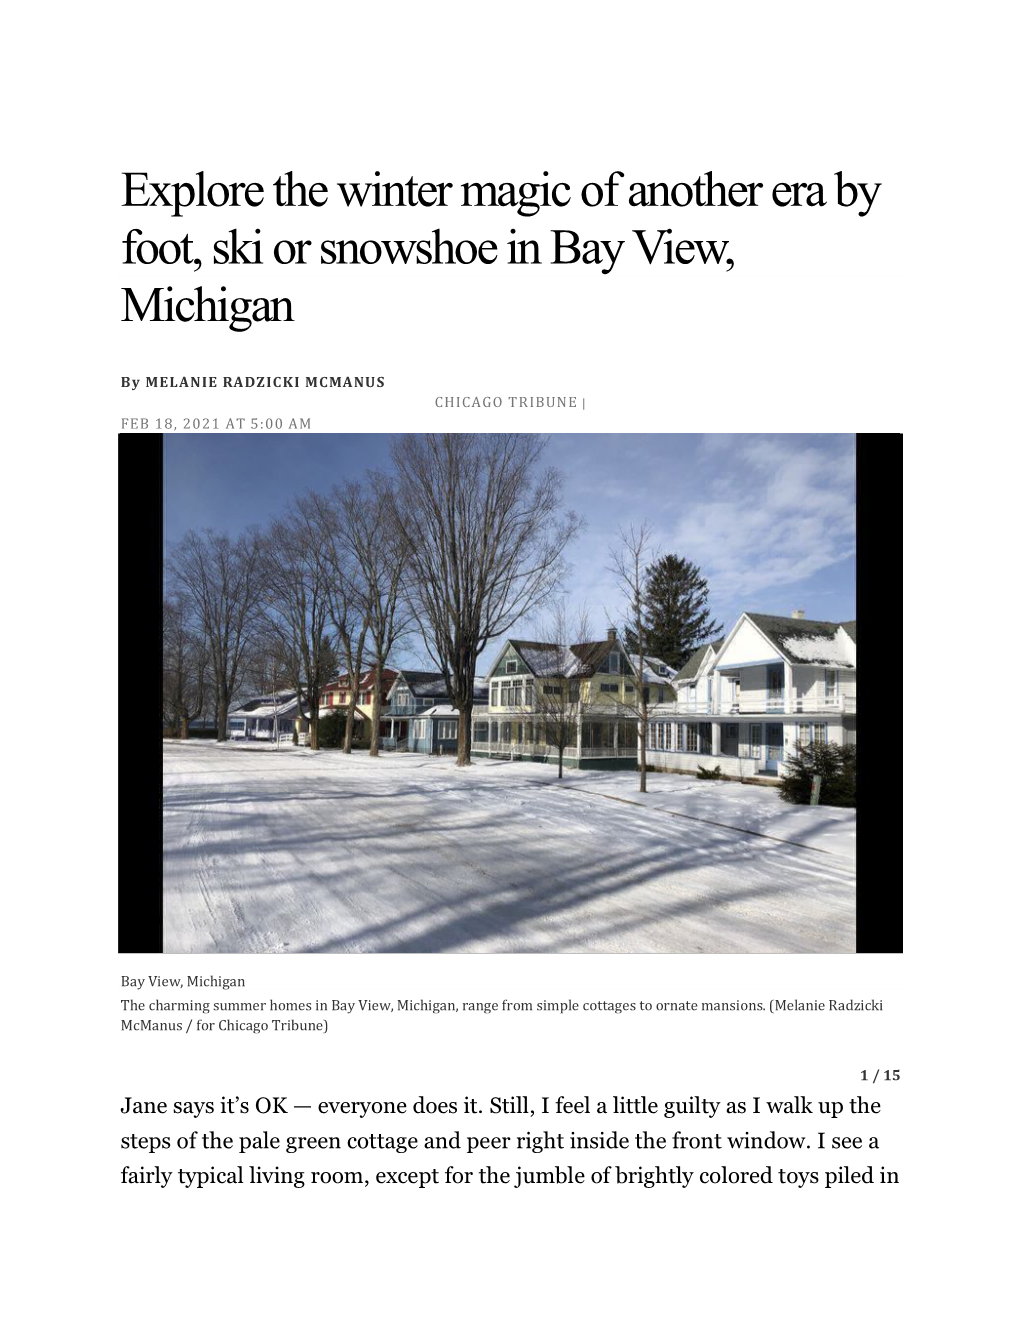 Explore the Winter Magic of Another Era by Foot, Ski Or Snowshoe in Bay View, Michigan